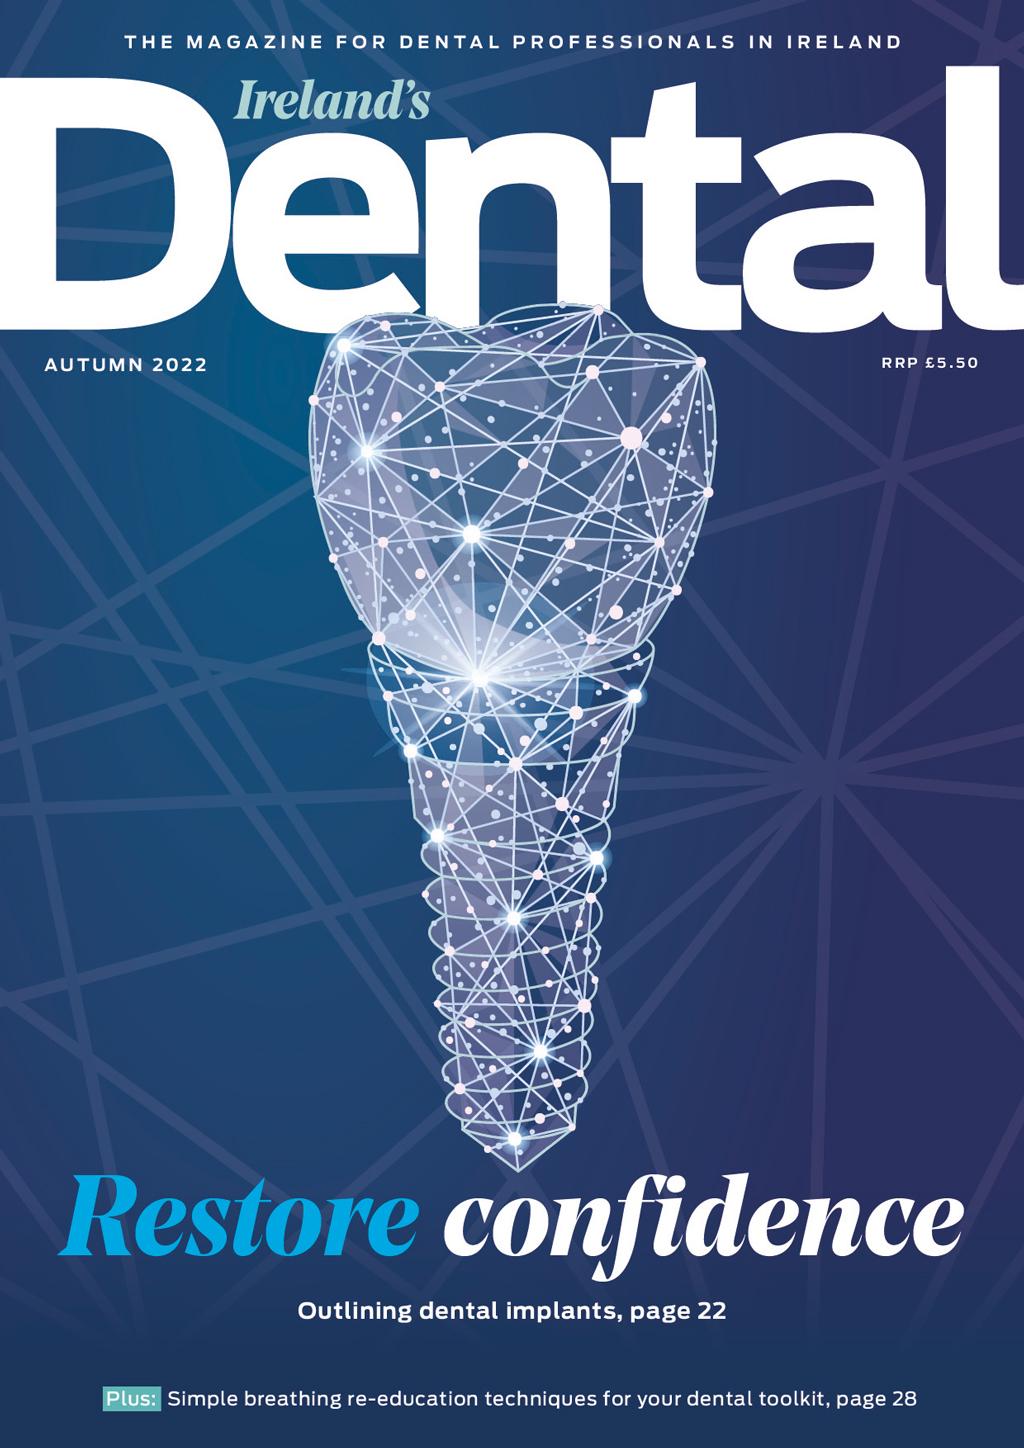 The cover of the autumn issue: lead story Restore confidence in implants, shown under an illustration of a wireframe of a tooth